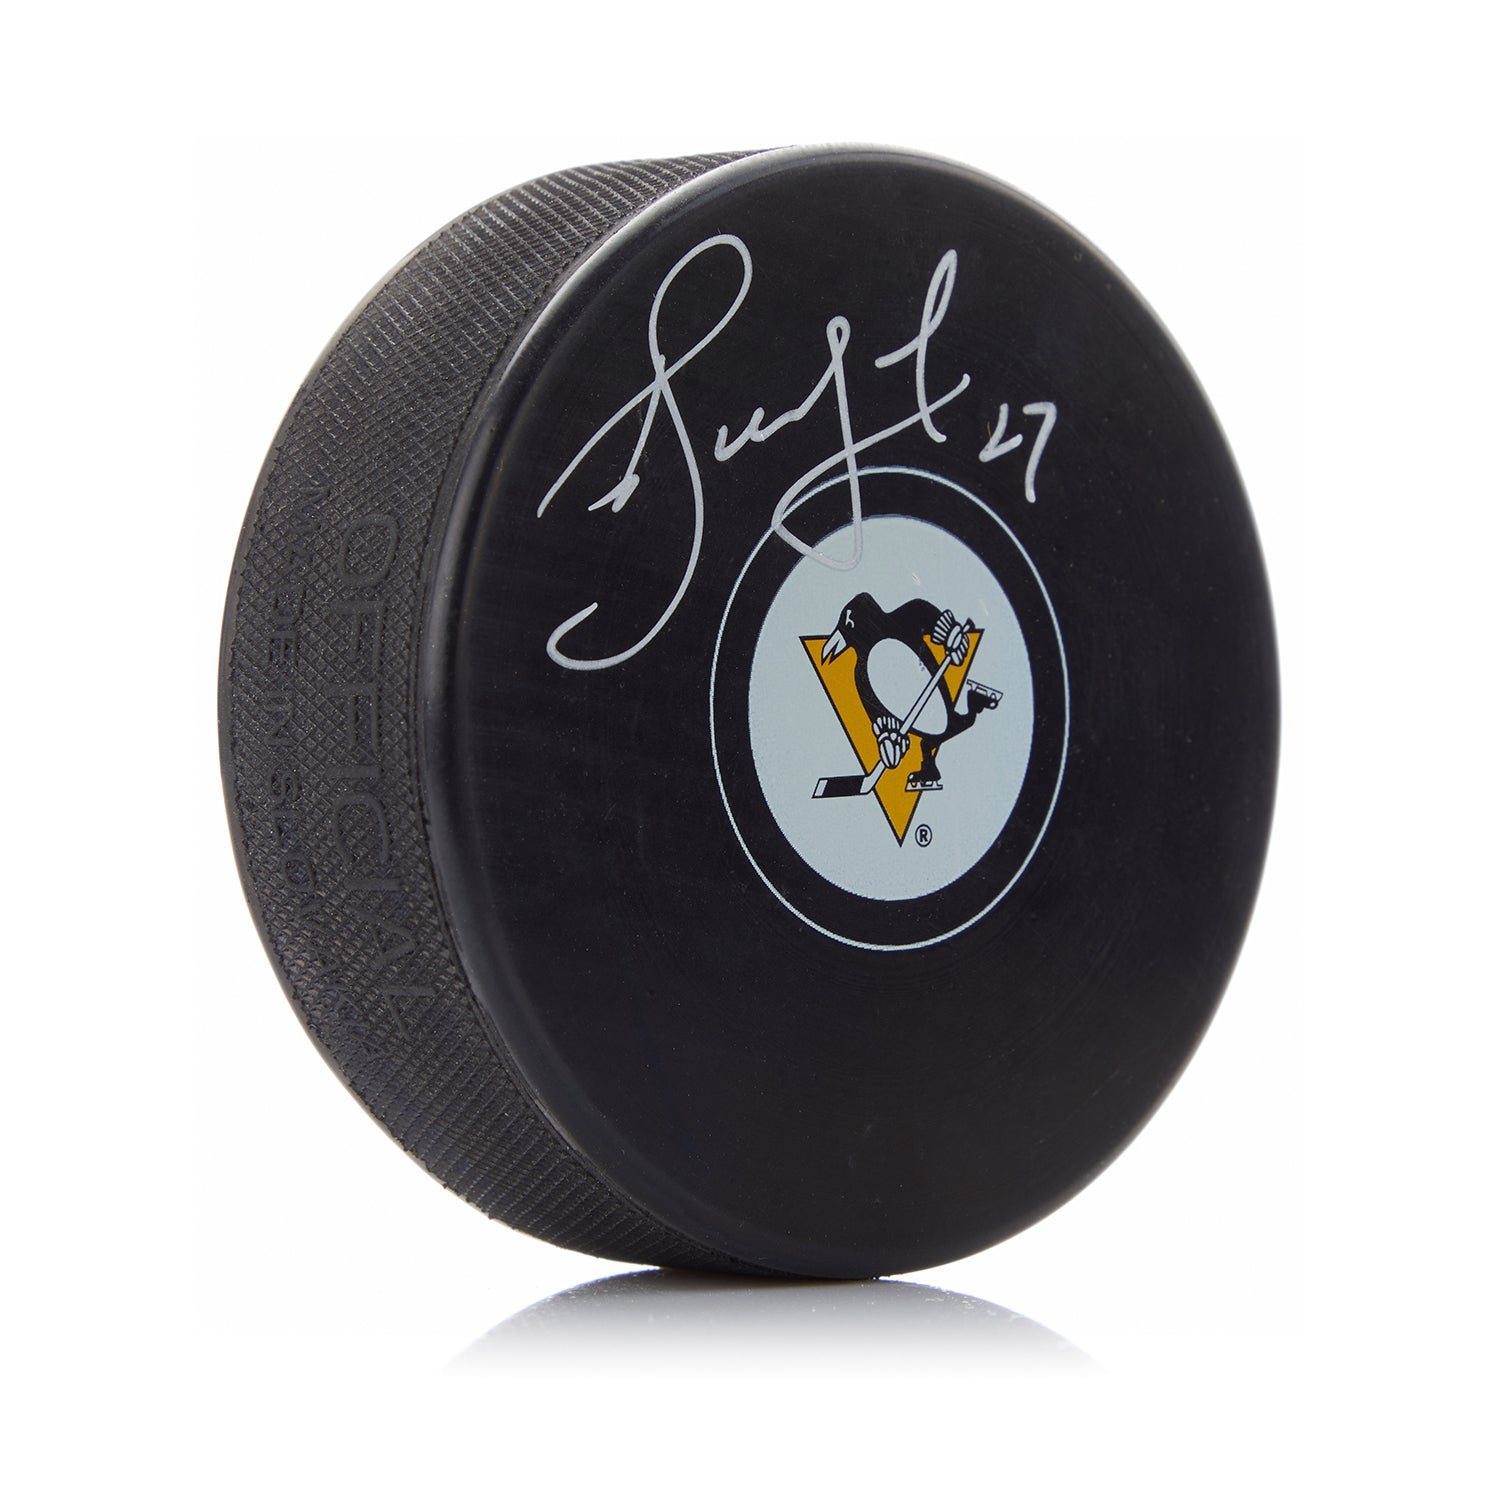 Alexei Kovalev Autographed Pittsburgh Penguins Hockey Puck